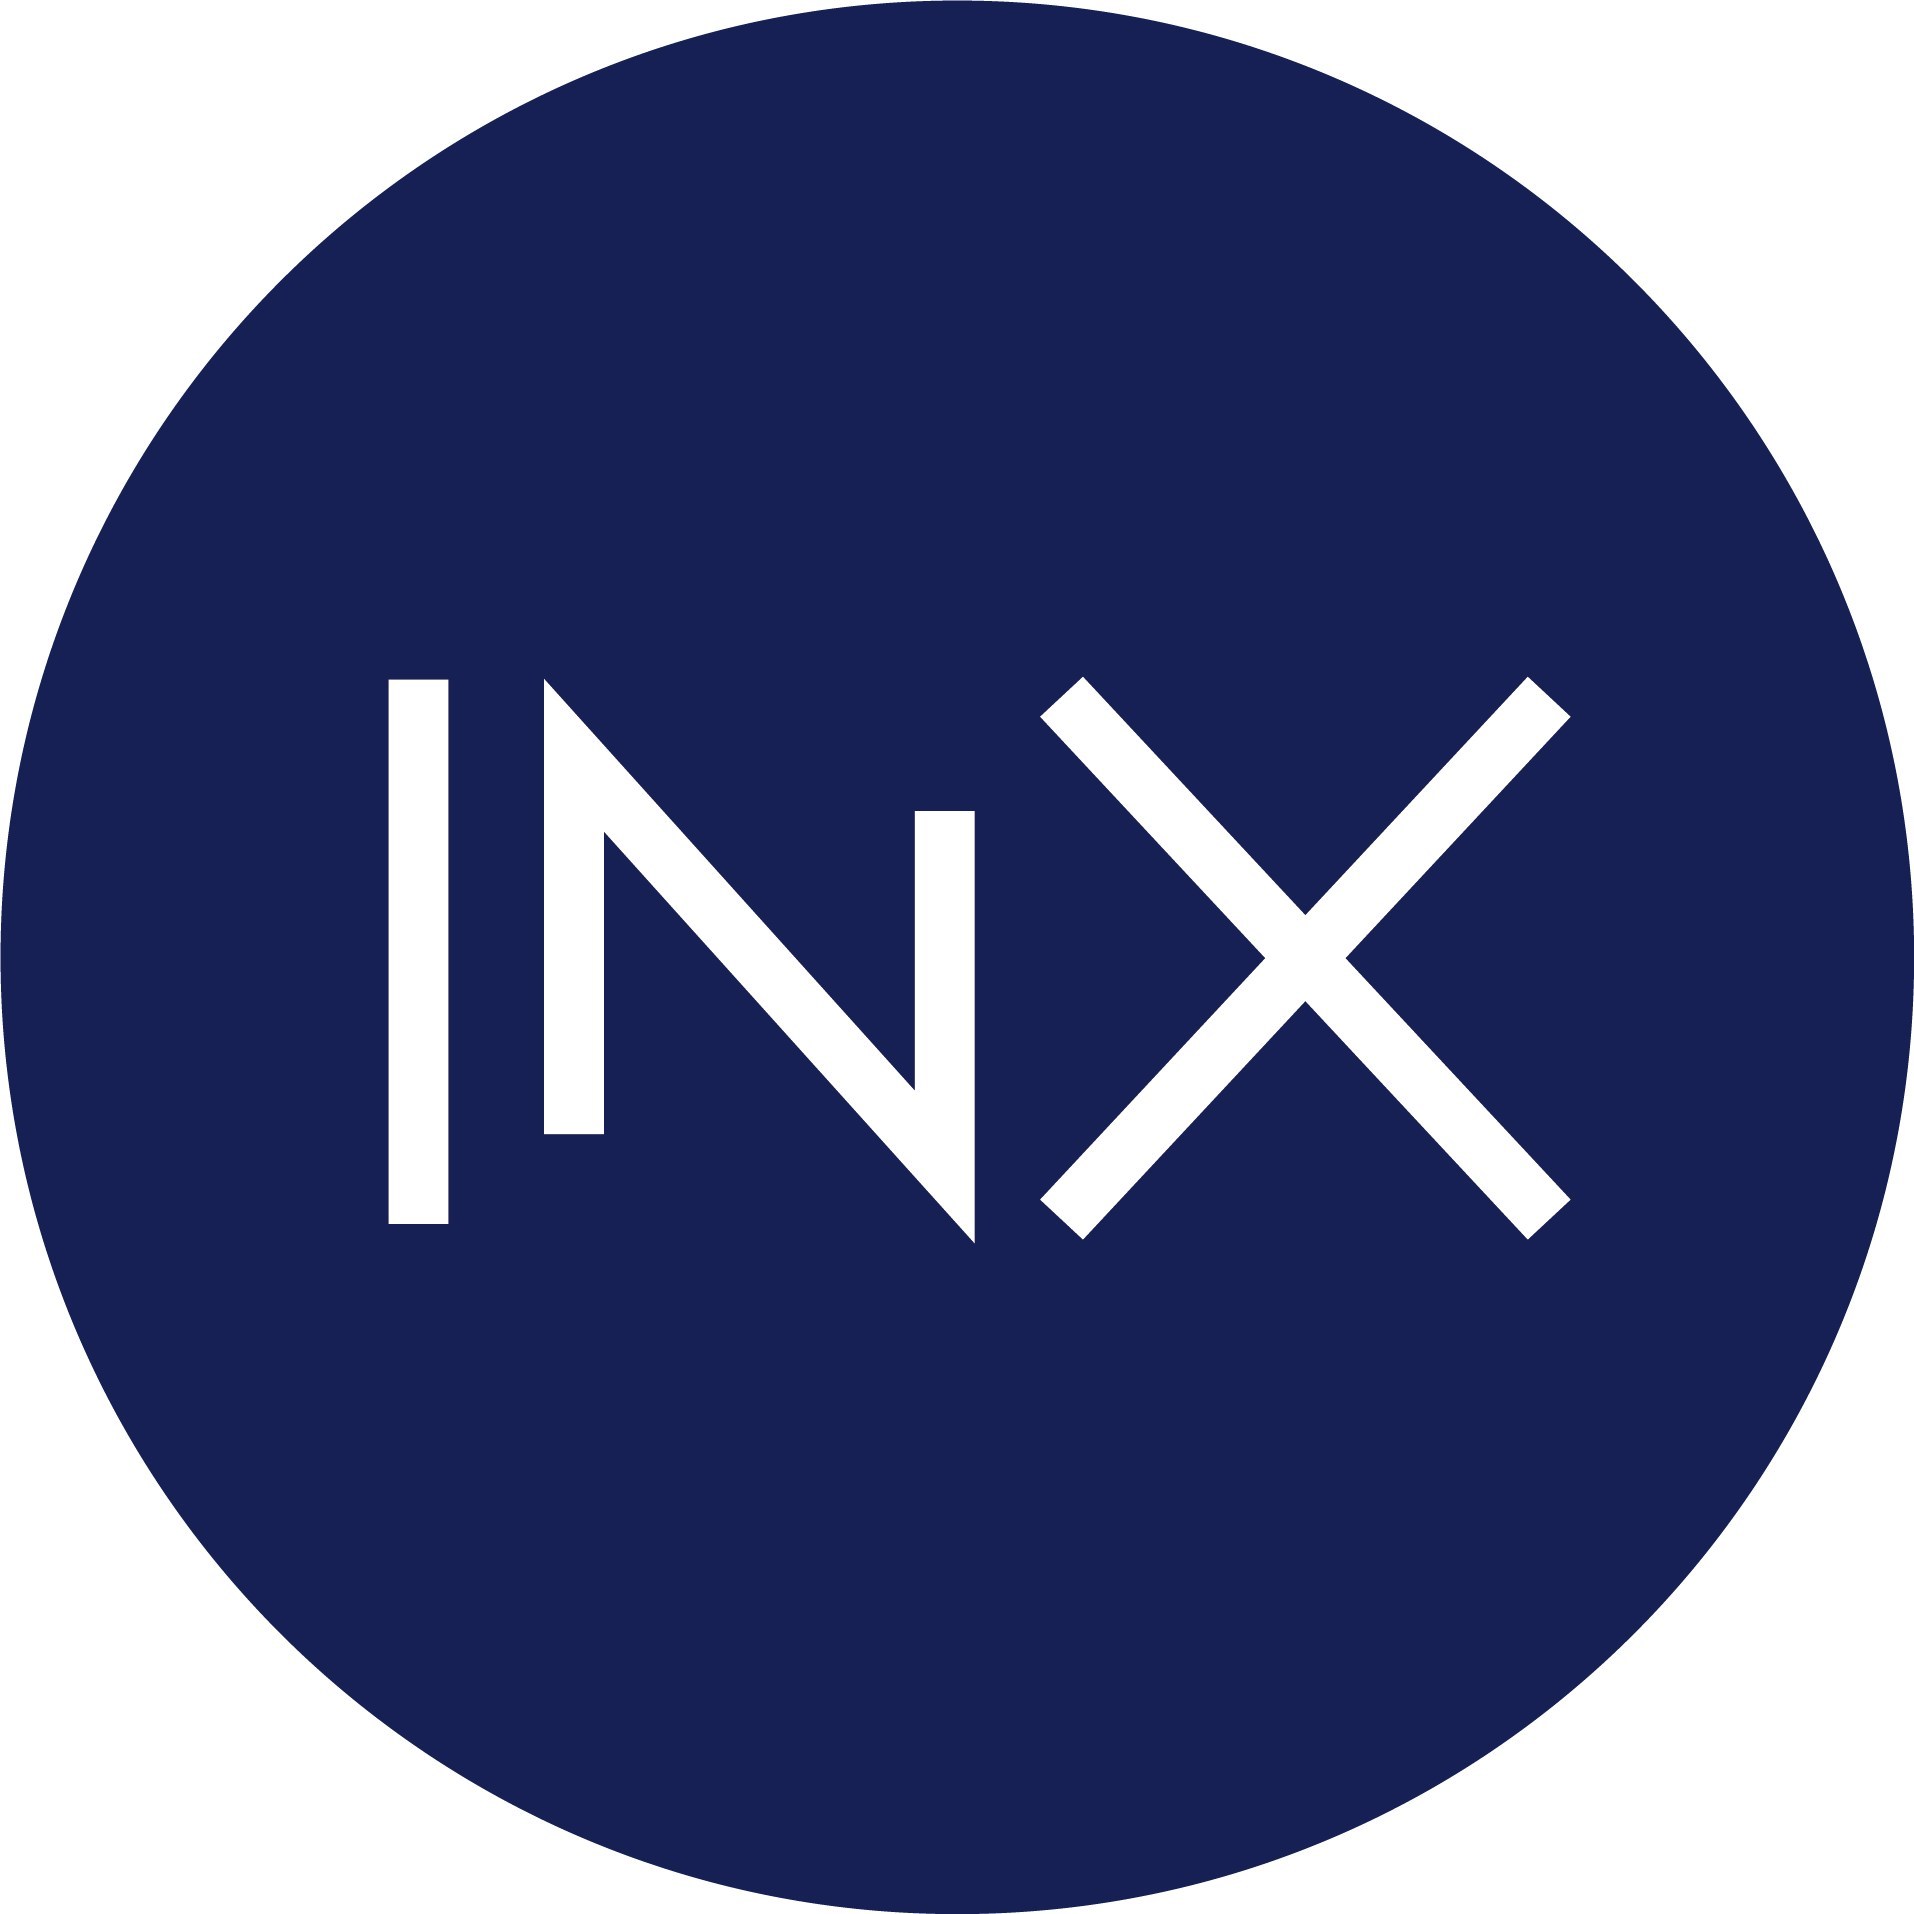 Shy Datika, CEO of The INX Digital Company, Inc., Announces Further Share Acquisition